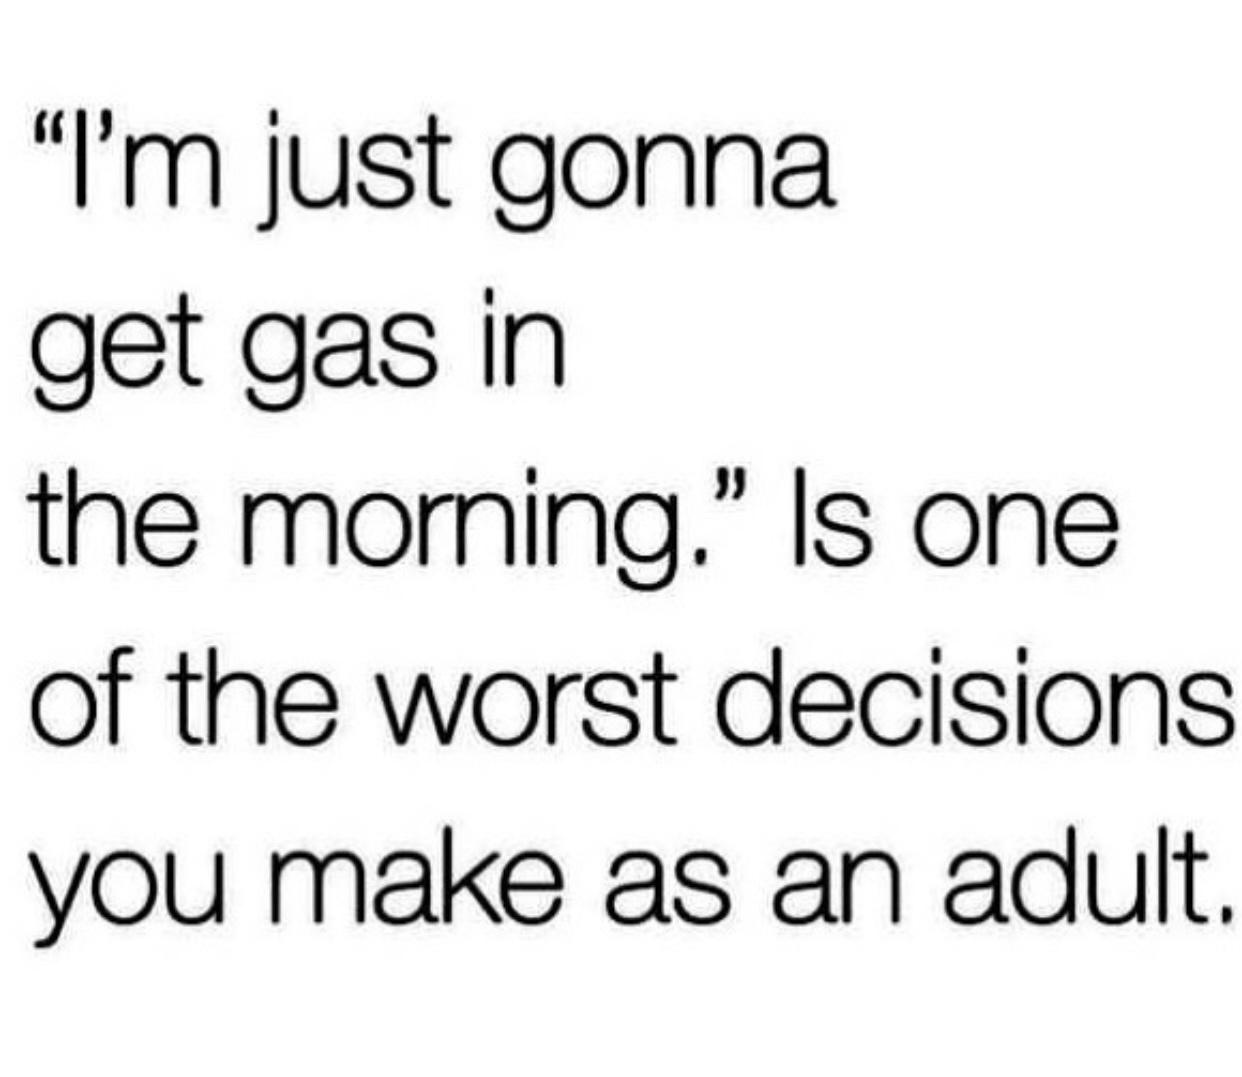 monday morning randomness - number - "I'm just gonna get gas in the morning." Is one of the worst decisions you make as an adult.